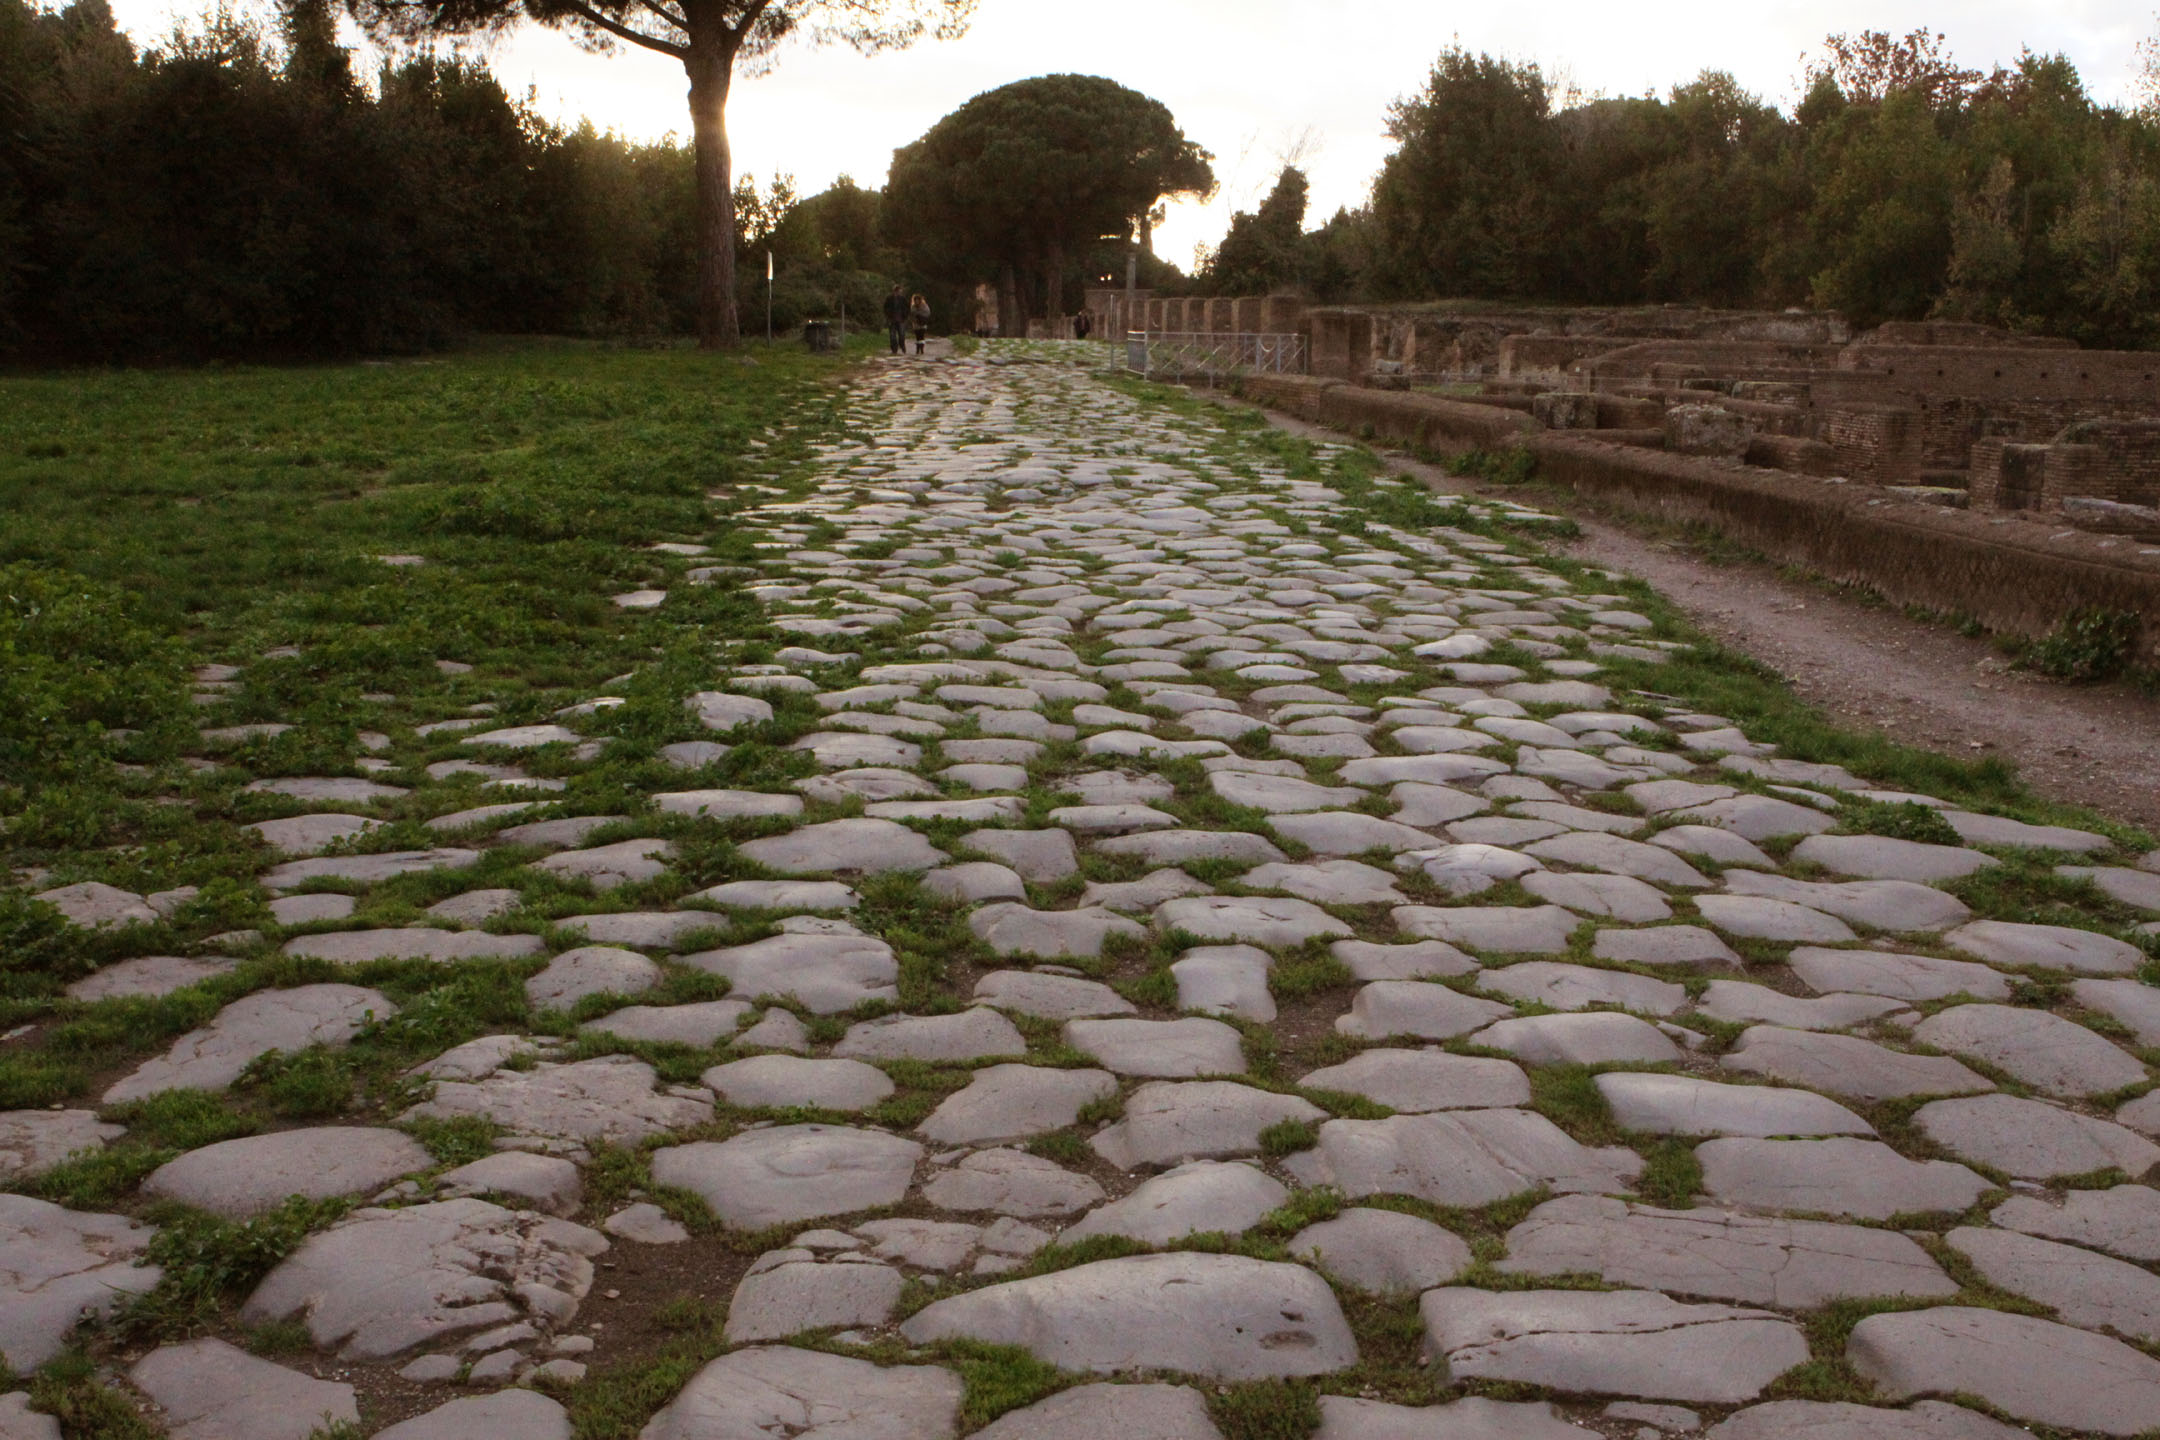 Sections of Via Appia.